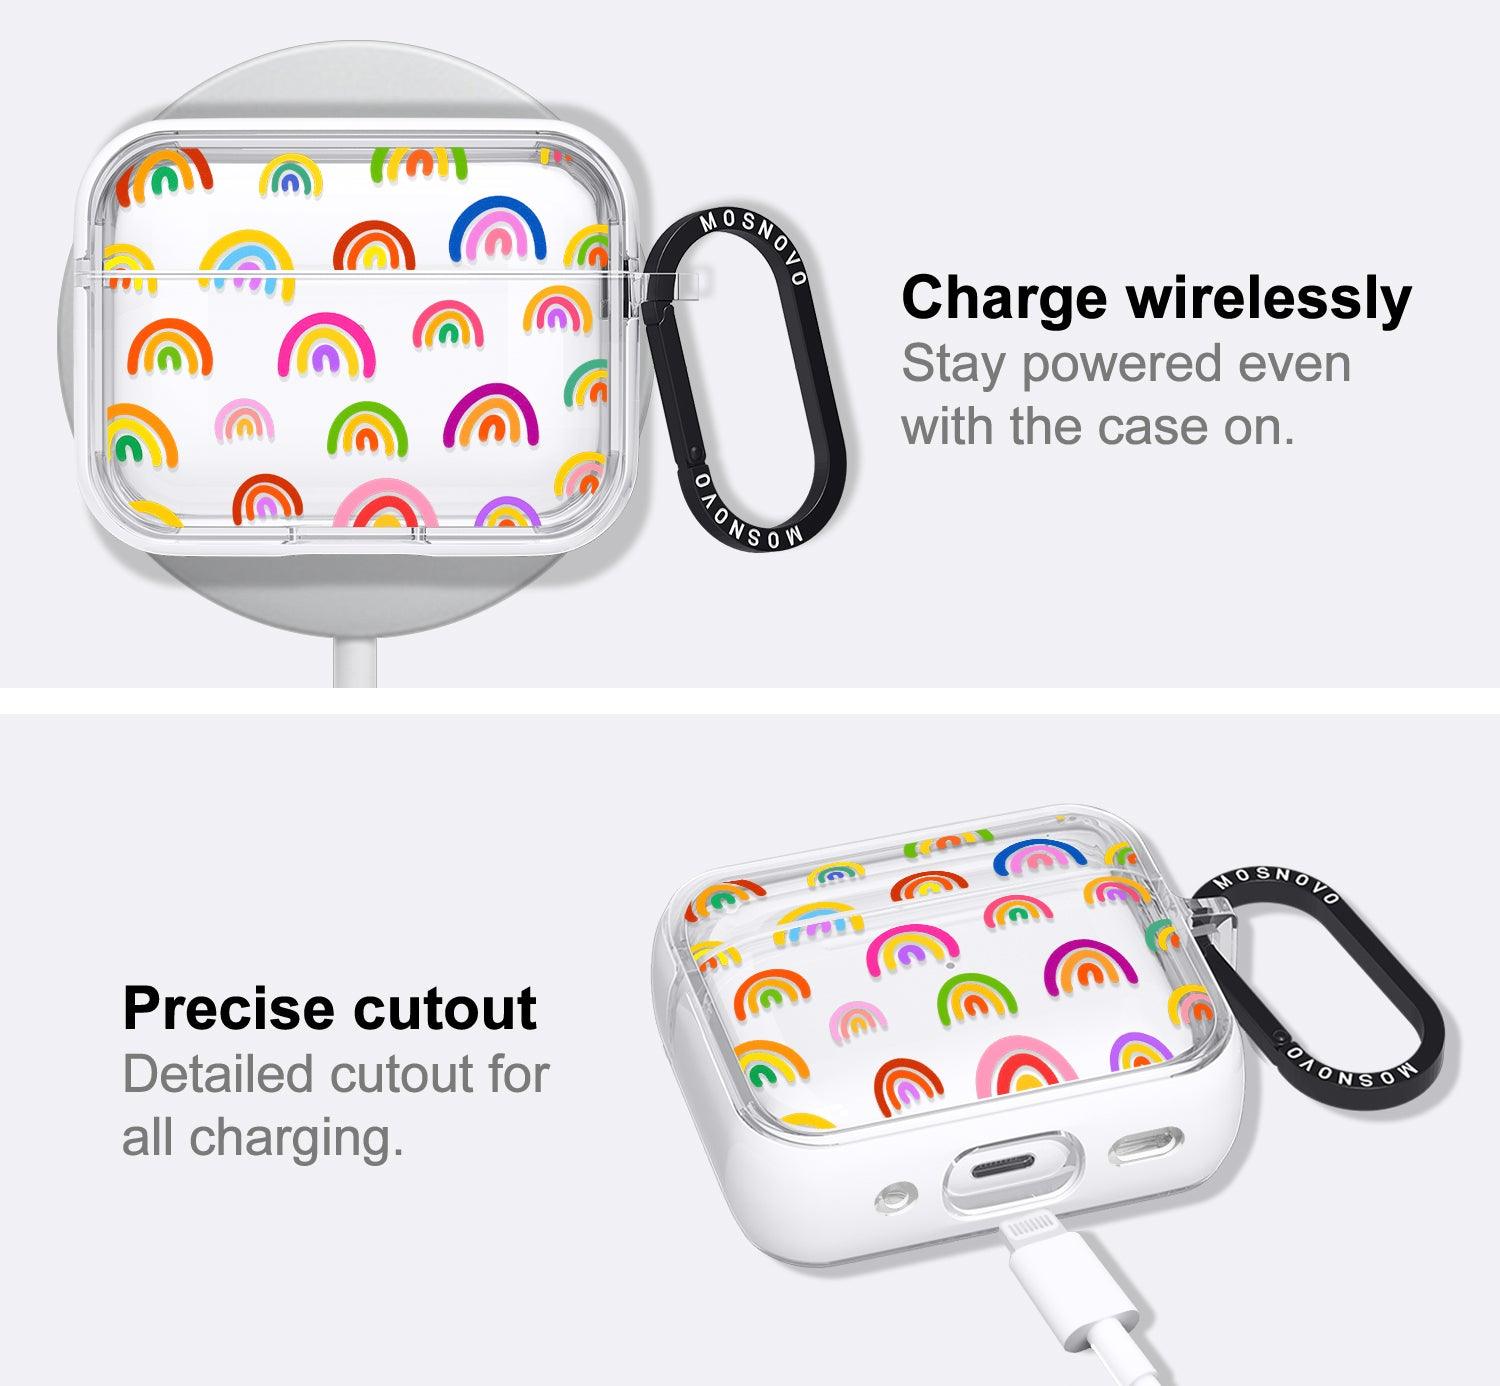 Cute Rainbow AirPods Pro 2 Case (2nd Generation) - MOSNOVO